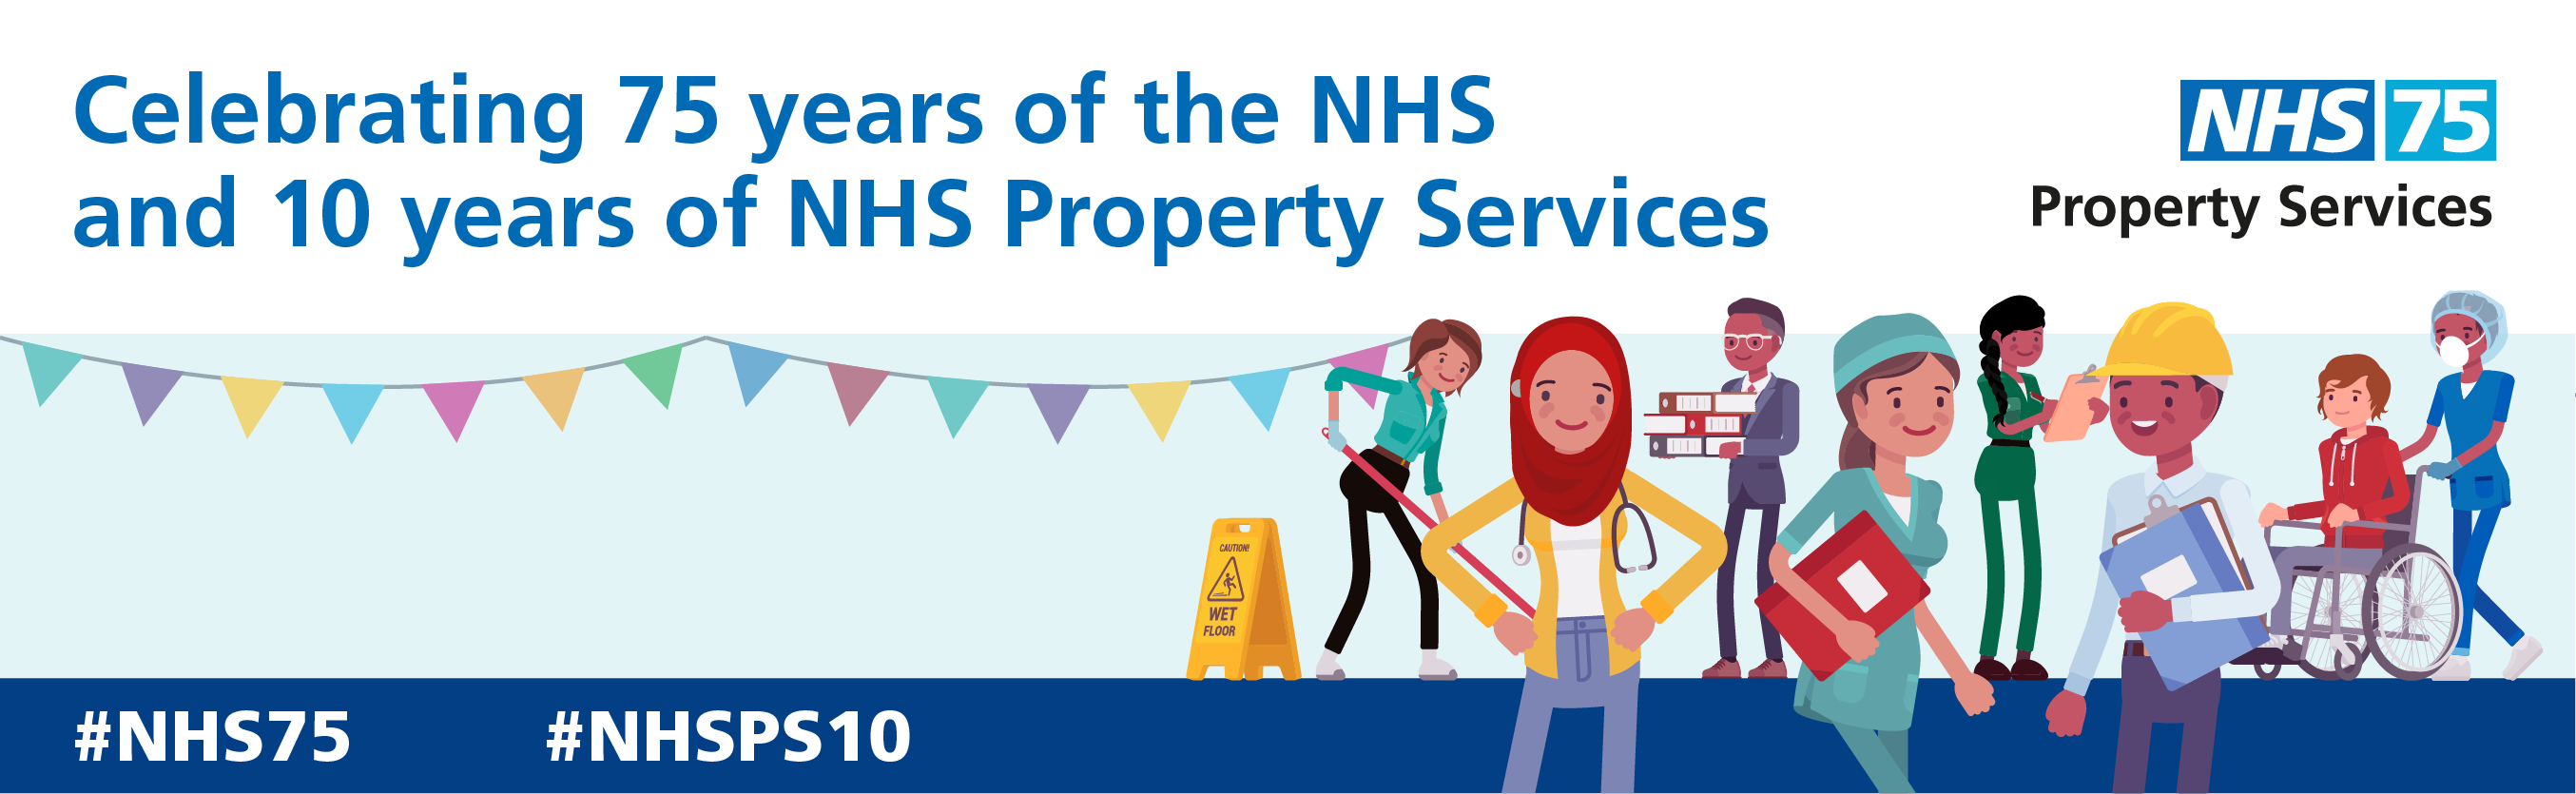 NHSPS marks a decade of supporting the NHS and celebrates 75 years of the NHS